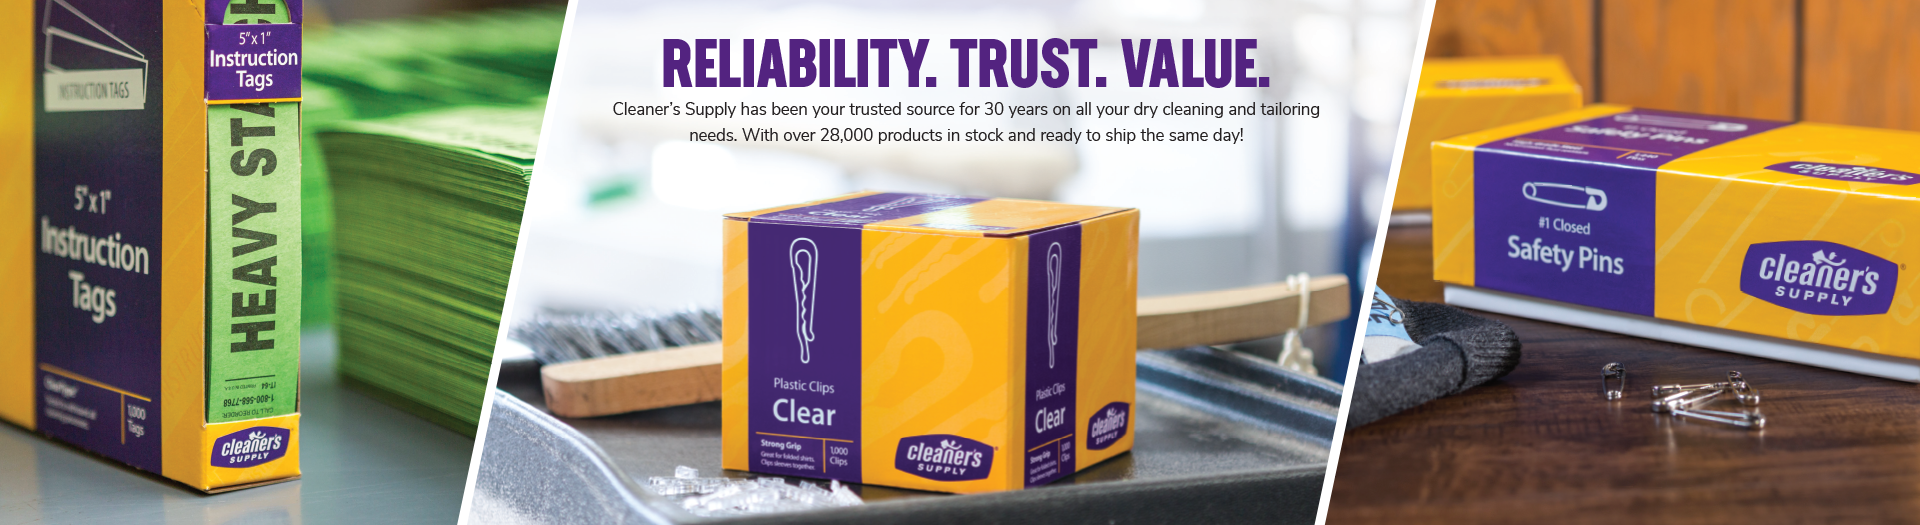 Reliabilty. Trust. Value. Cleaner's Supply has been your trusted source for 30 years on all your dry cleaning and tailoring needs. With over 28,000 products in stock and ready to ship the same day!